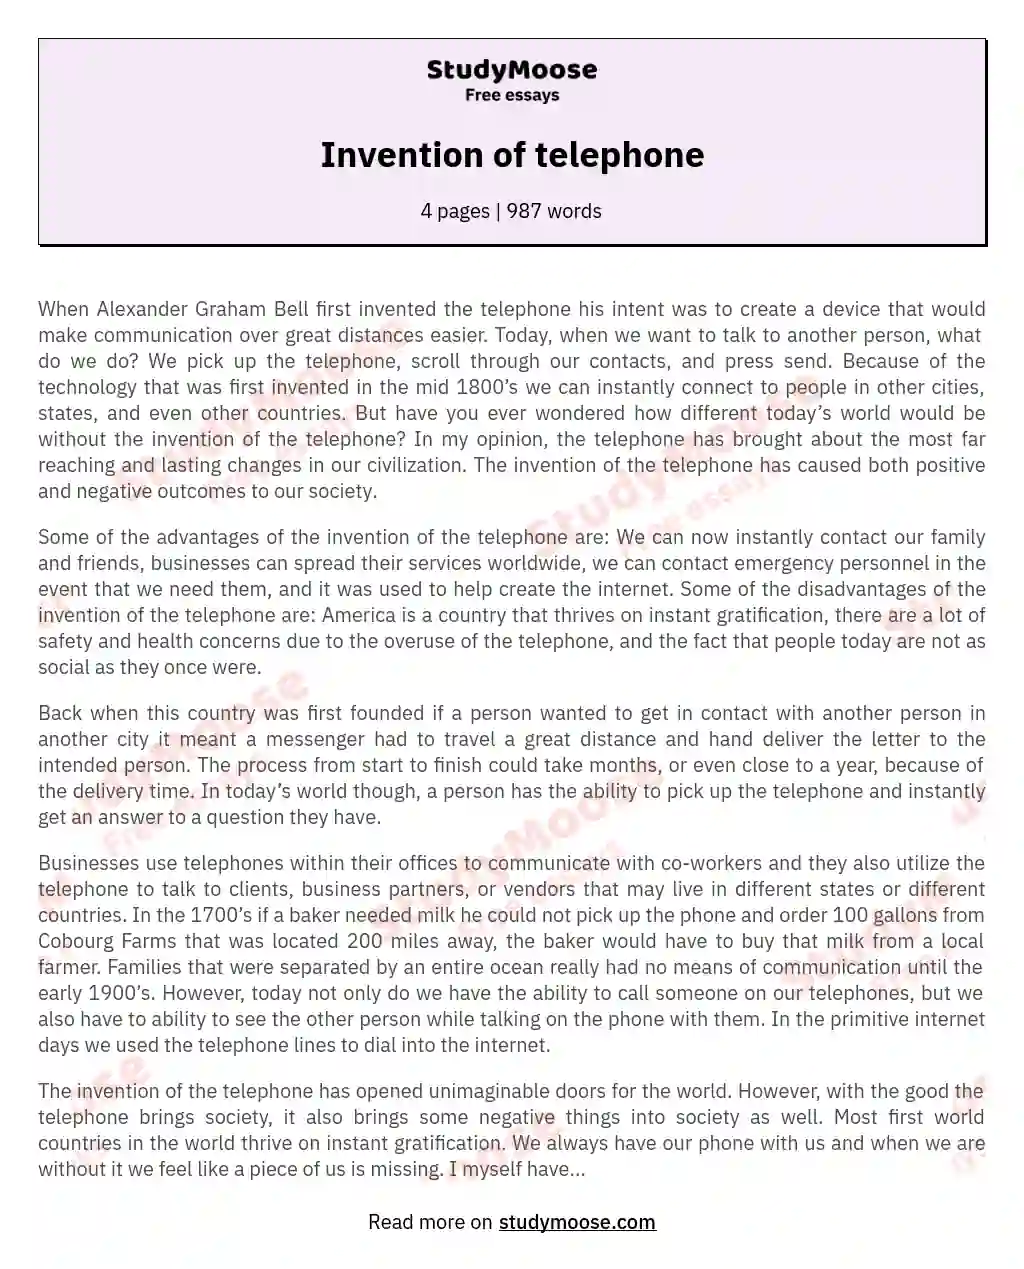 Invention of telephone essay